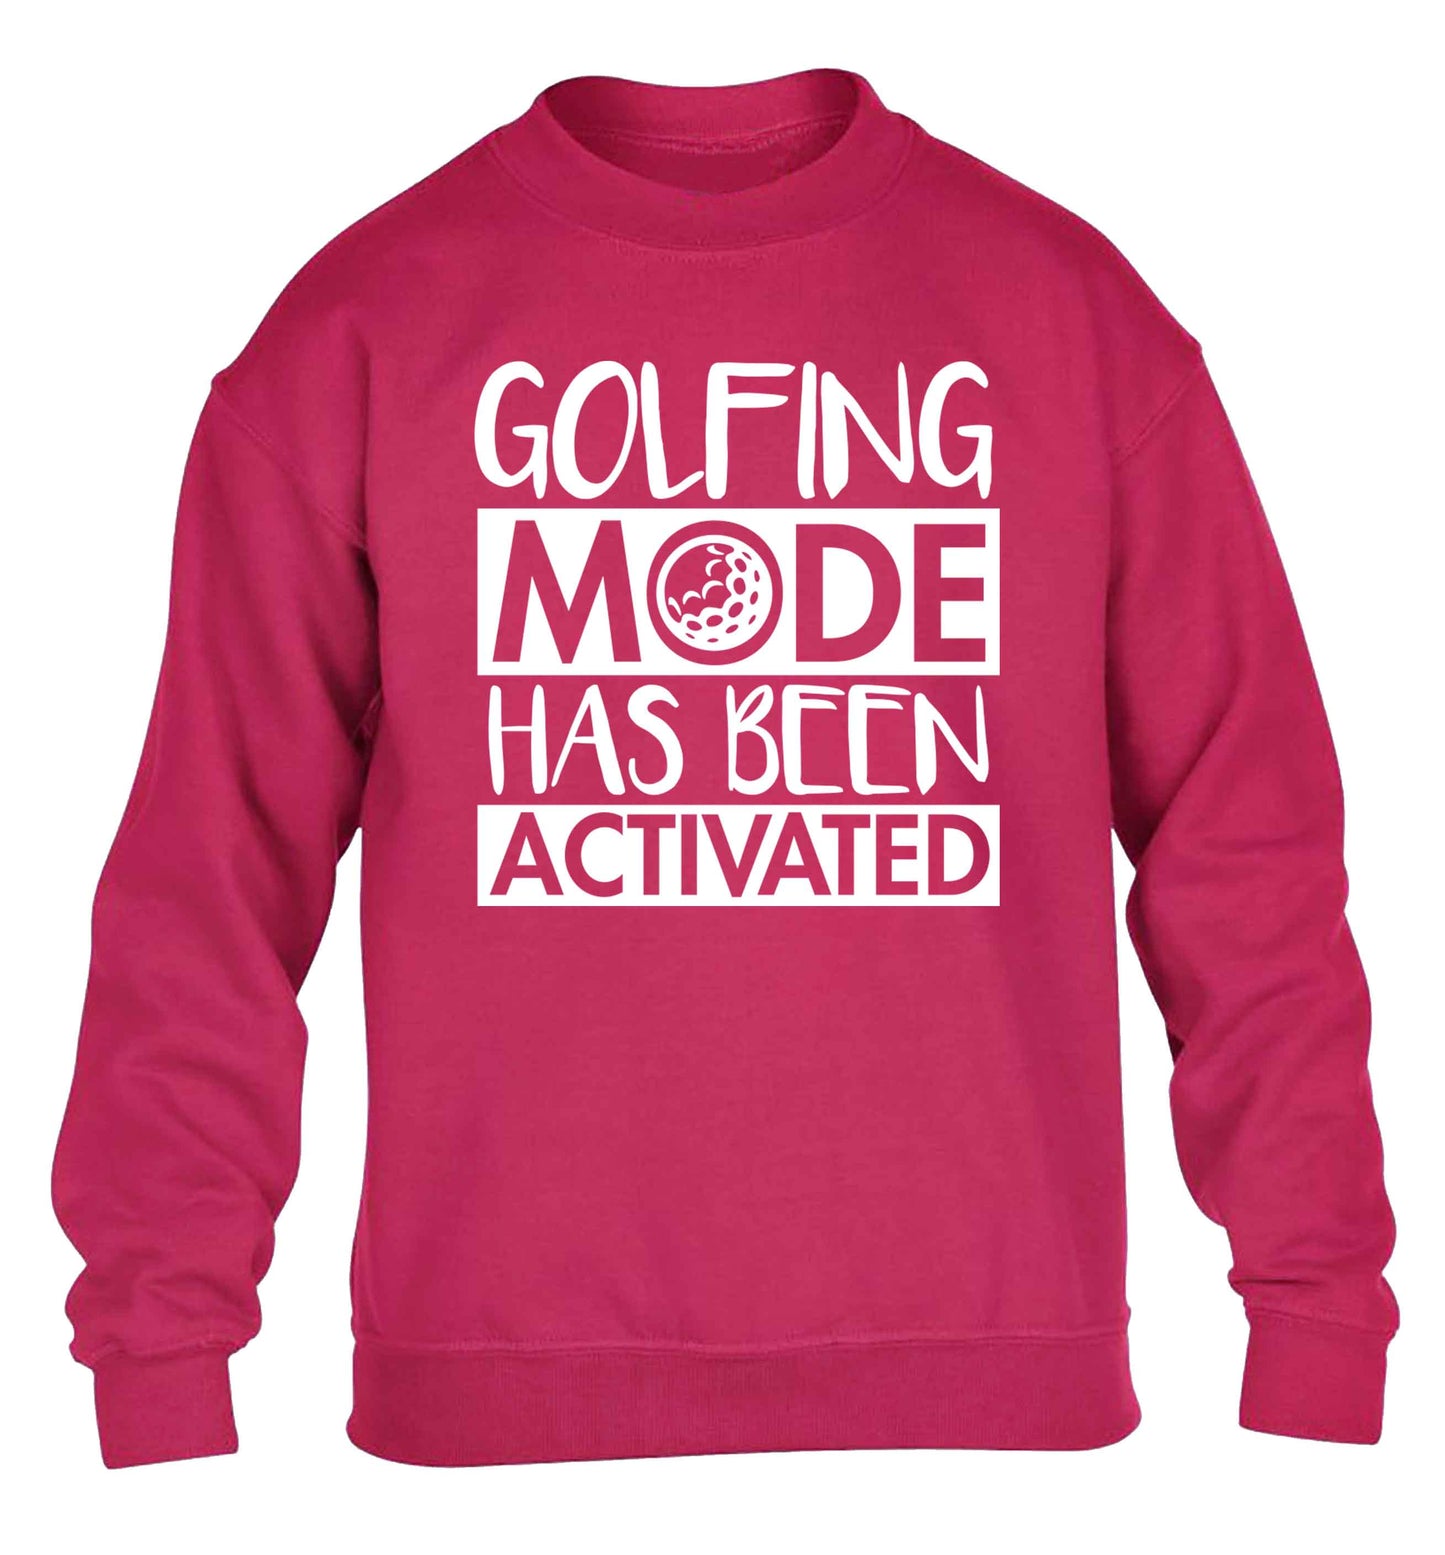 Golfing mode has been activated children's pink sweater 12-13 Years